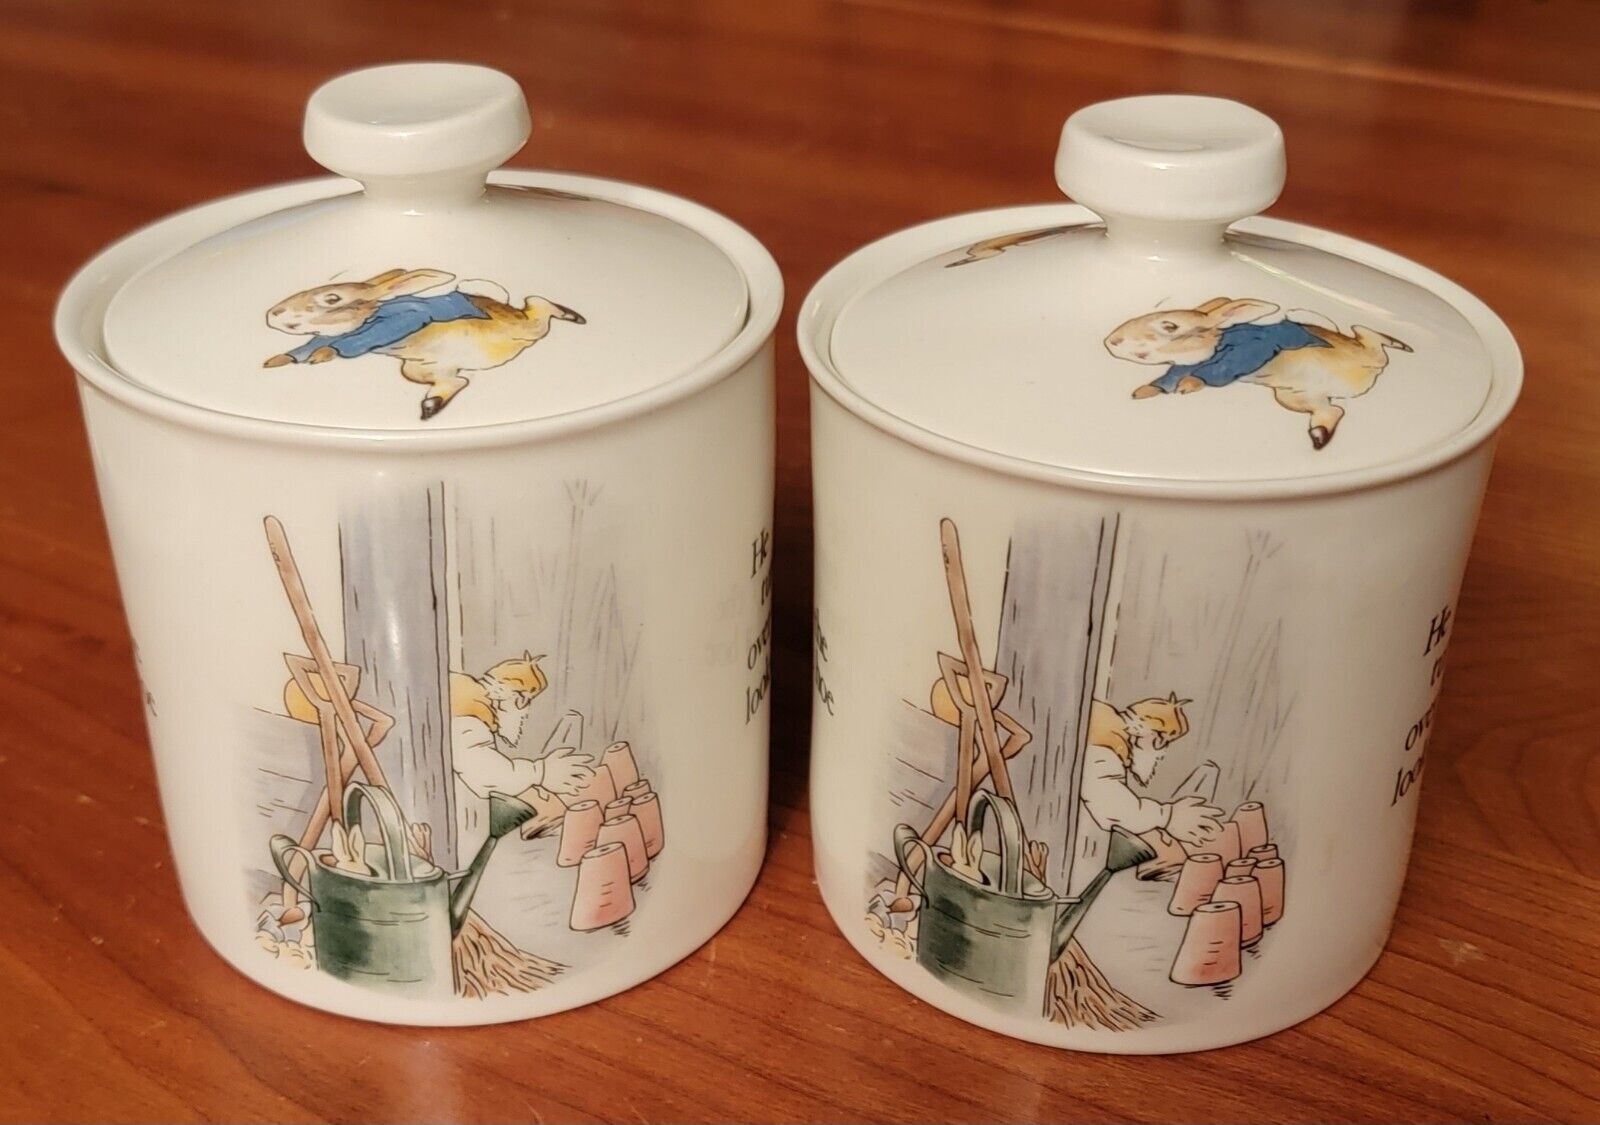 Wedgwood Peter Rabbit Honey Pot or Candy Jar(s) w Lid  Noise of a Hoe  Excellent